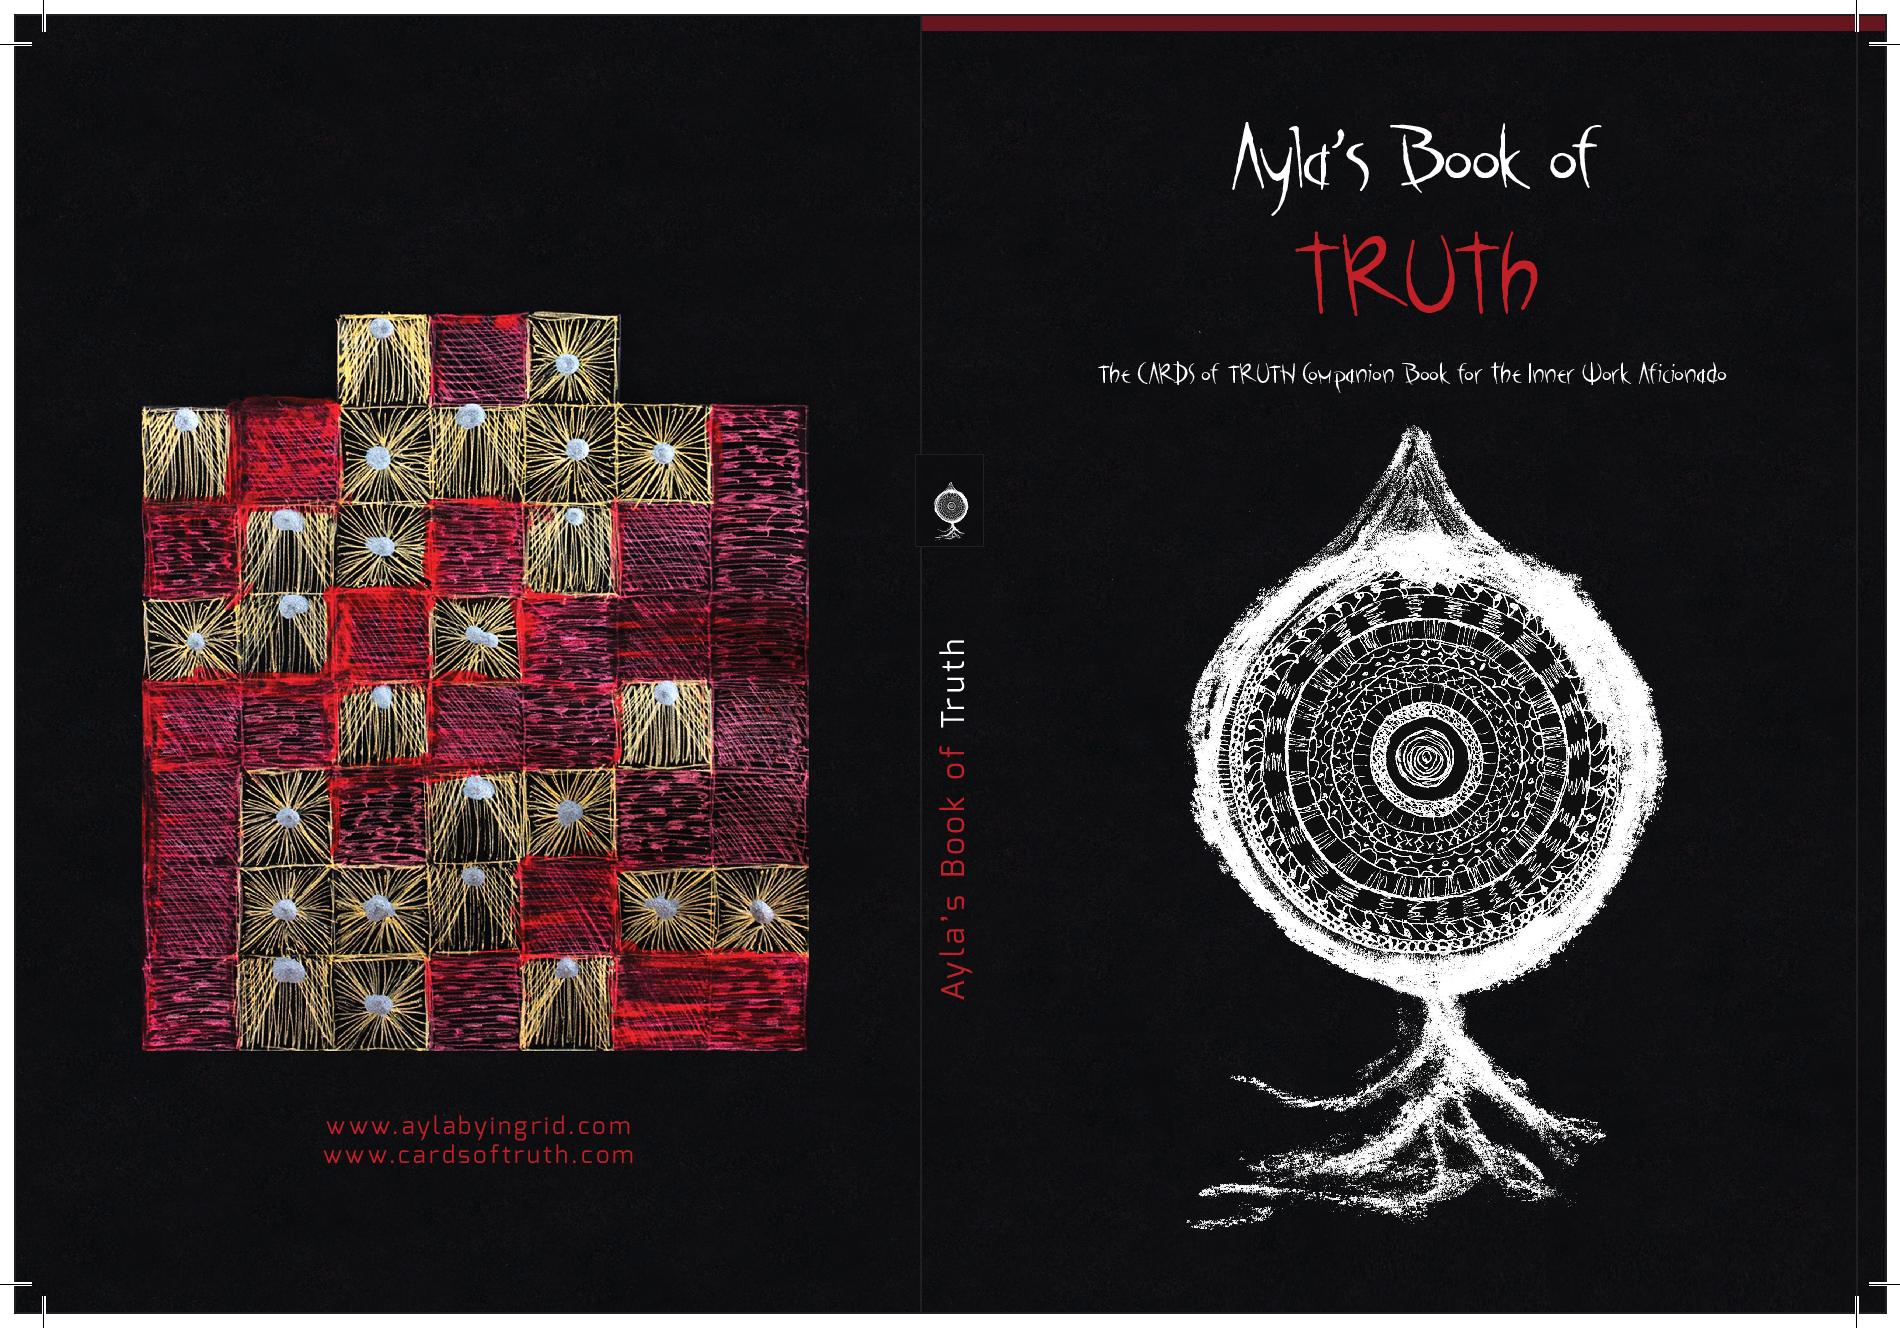 Ayla's Book of Truth